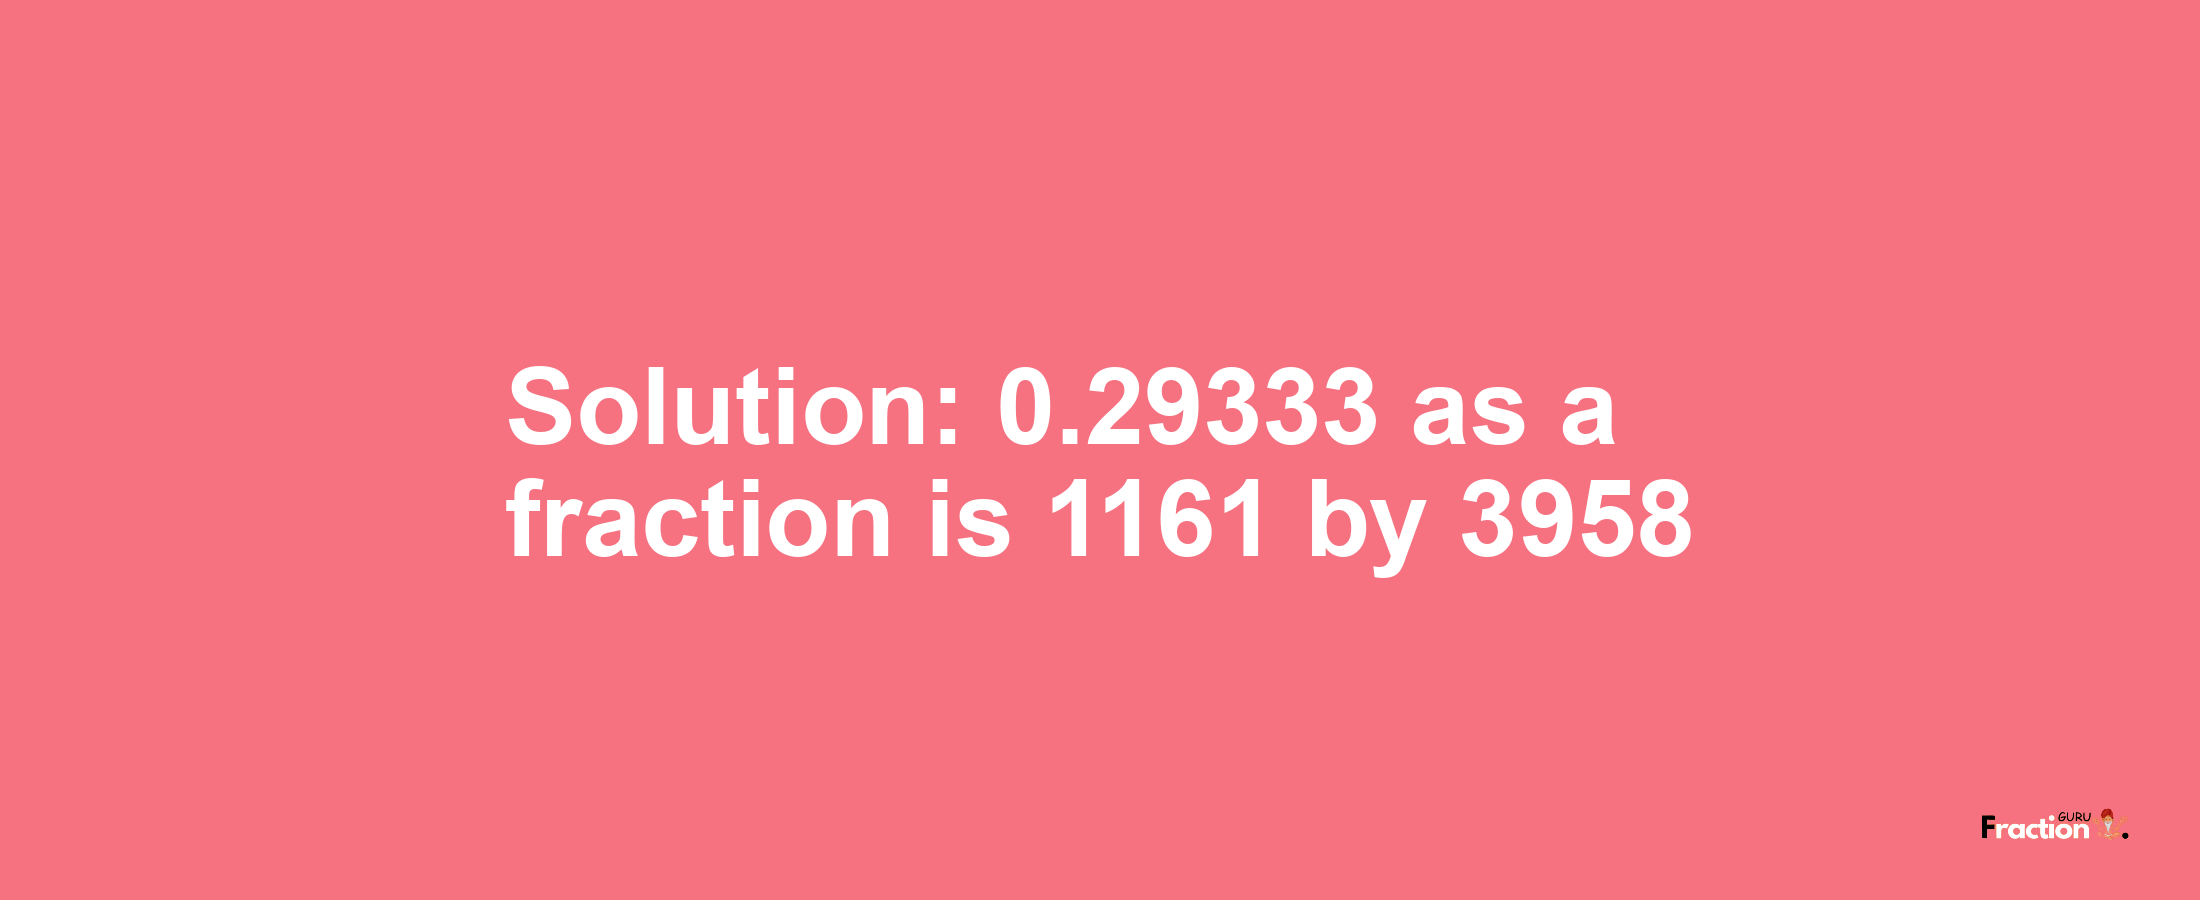 Solution:0.29333 as a fraction is 1161/3958